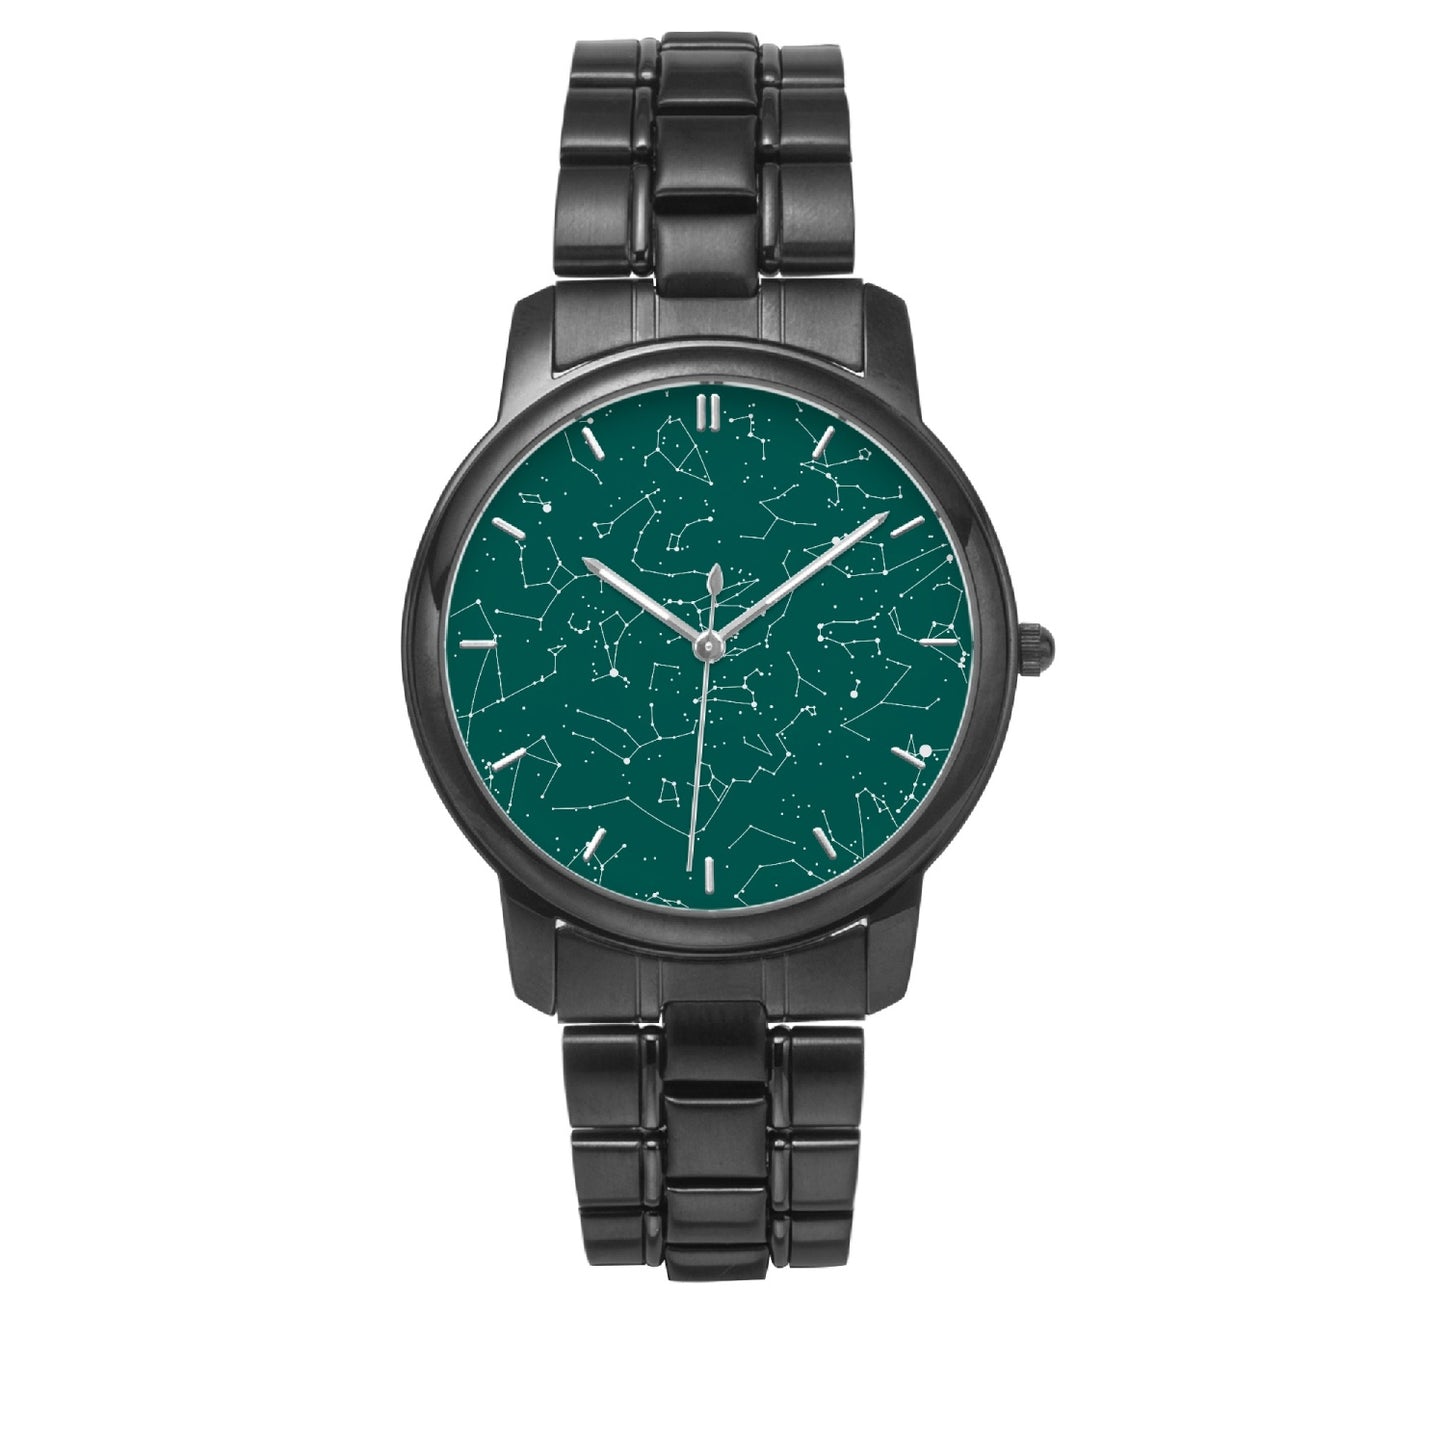 Anniversary Gift For Him, Personalized Star Map Folding Clasp Type Stainless Steel Quartz Watch Emerald Green